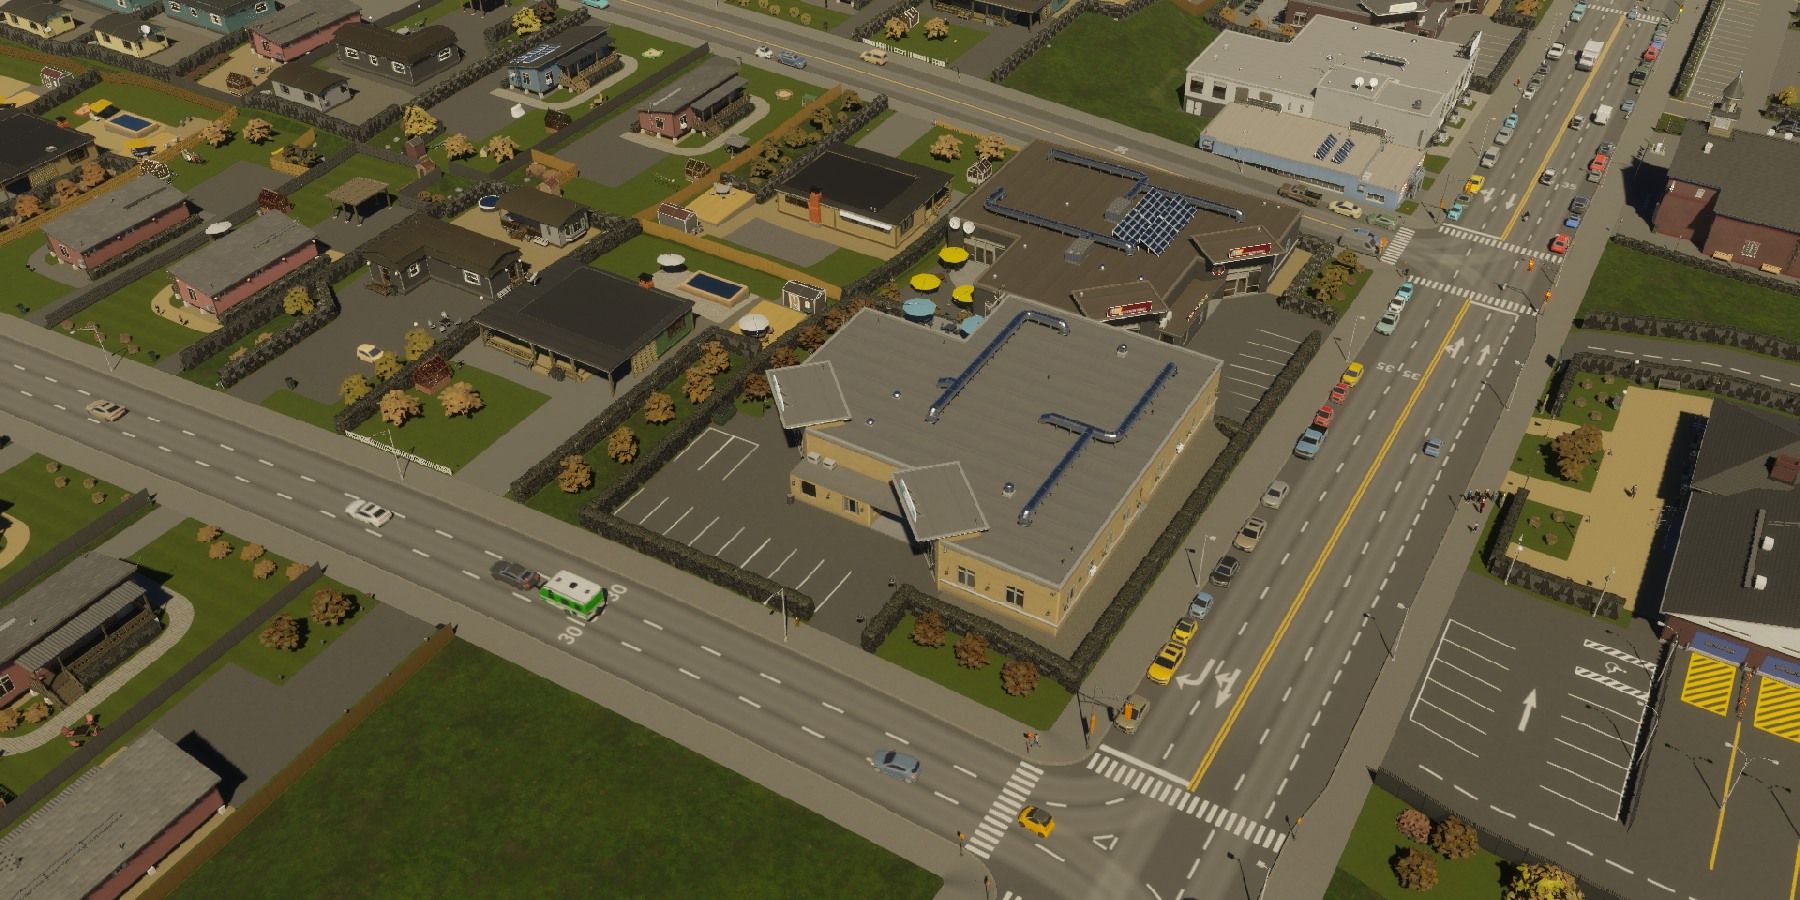 How to Prevent Road Accidents in Cities: Skylines 2